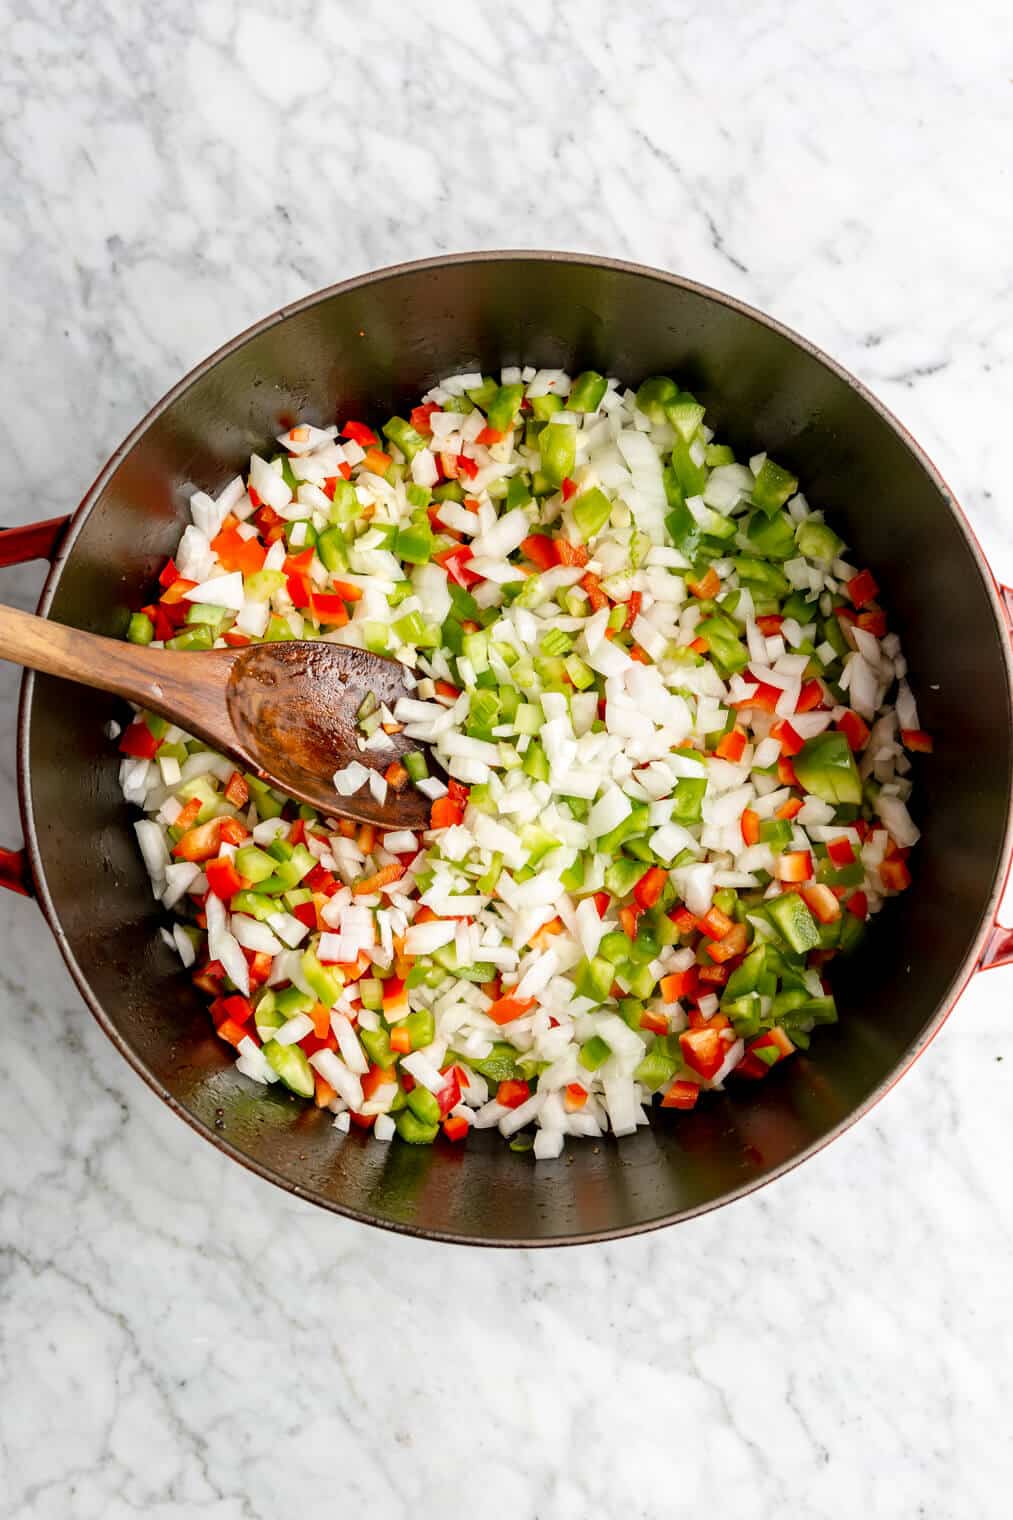 Diced onion, bell peppers, garlic, and celery being sautéed in a large dutch oven with a wooden spoon.